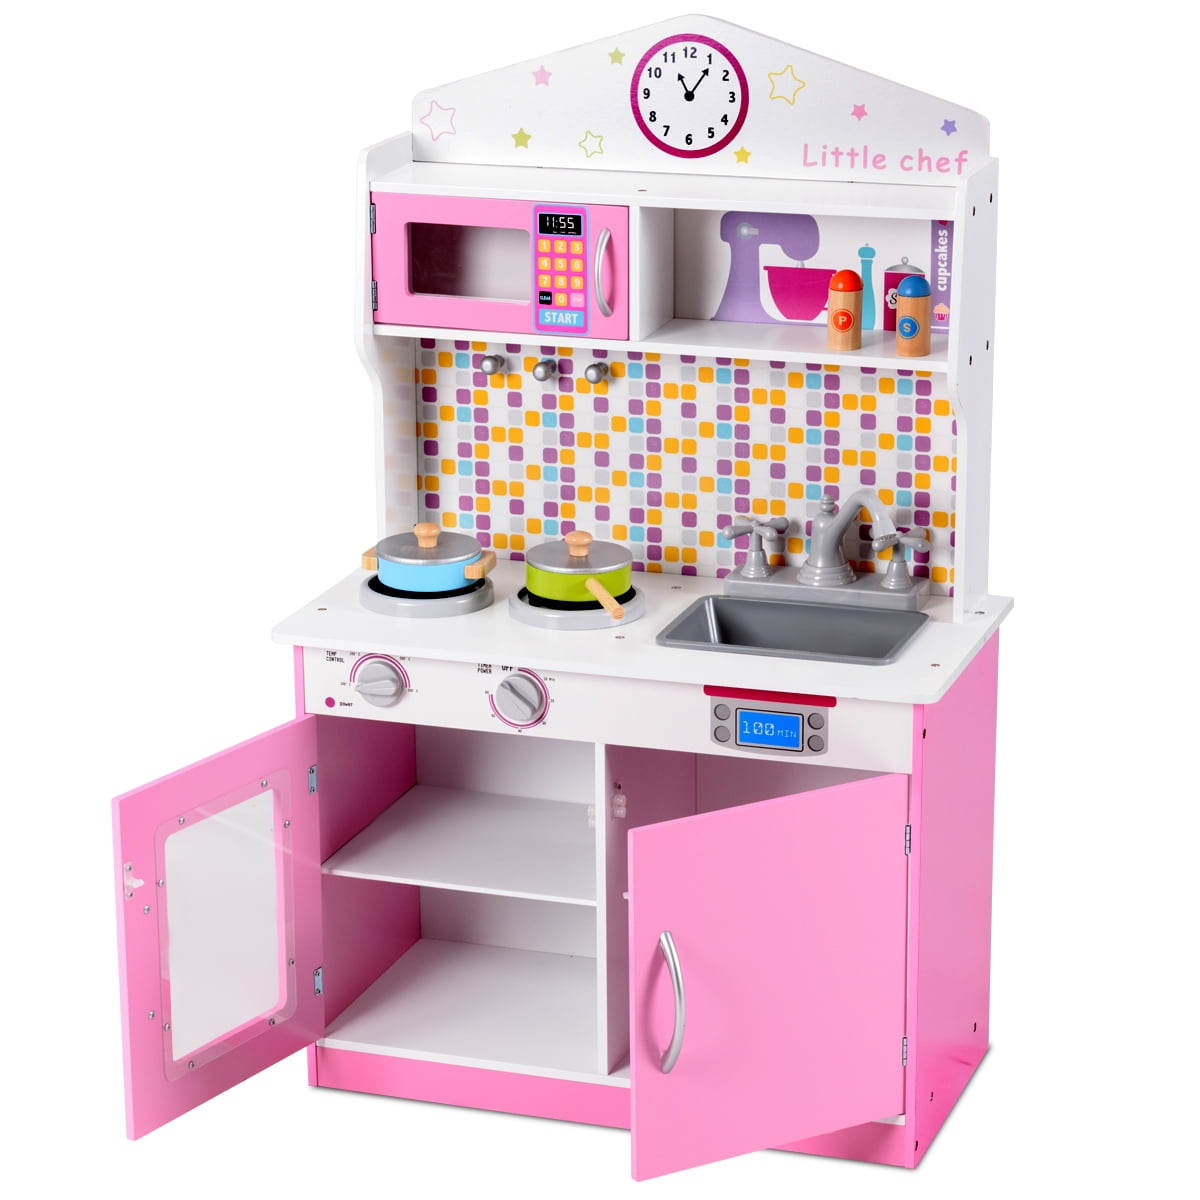 Plastic Kitchenware Toy Toddler  Playset Kids Cooking Pretend Play Set Gift New 